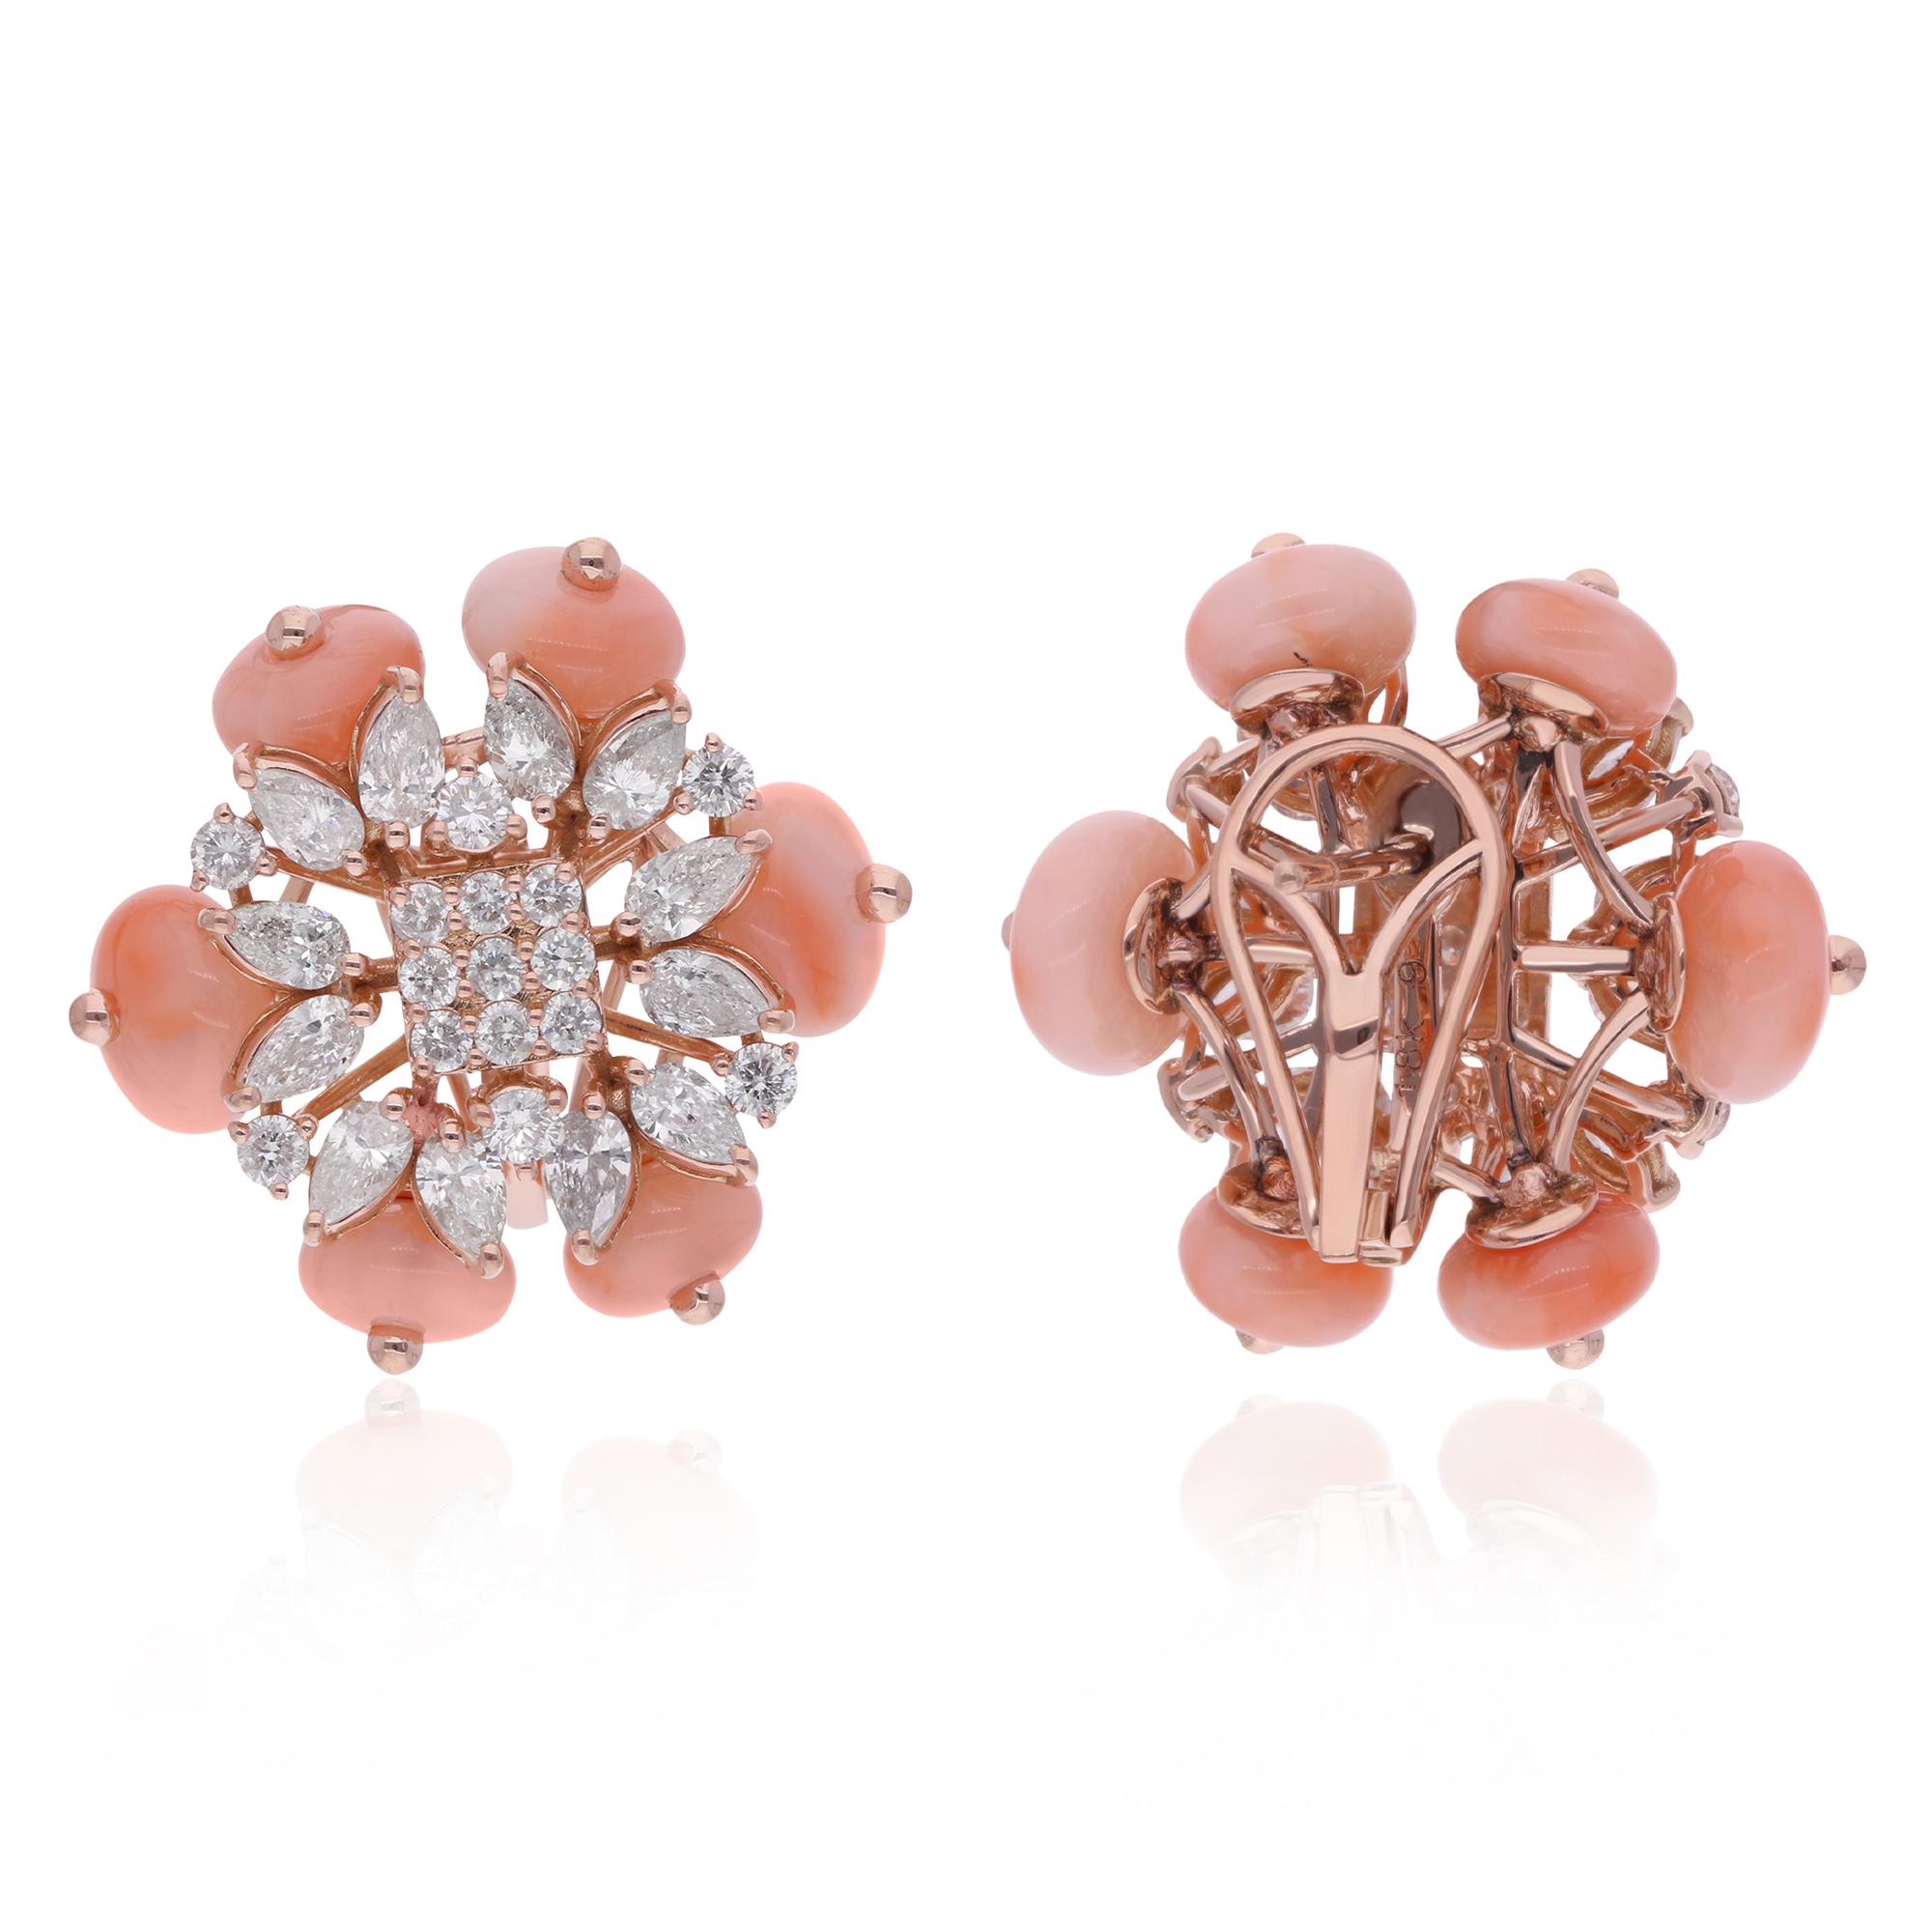 The 14 karat rose gold setting lends a warm and romantic hue to the ensemble, perfectly complementing the rich tones of the coral gemstones. The gentle curves of the marquise diamonds add a touch of grace and fluidity, while the brilliance of the